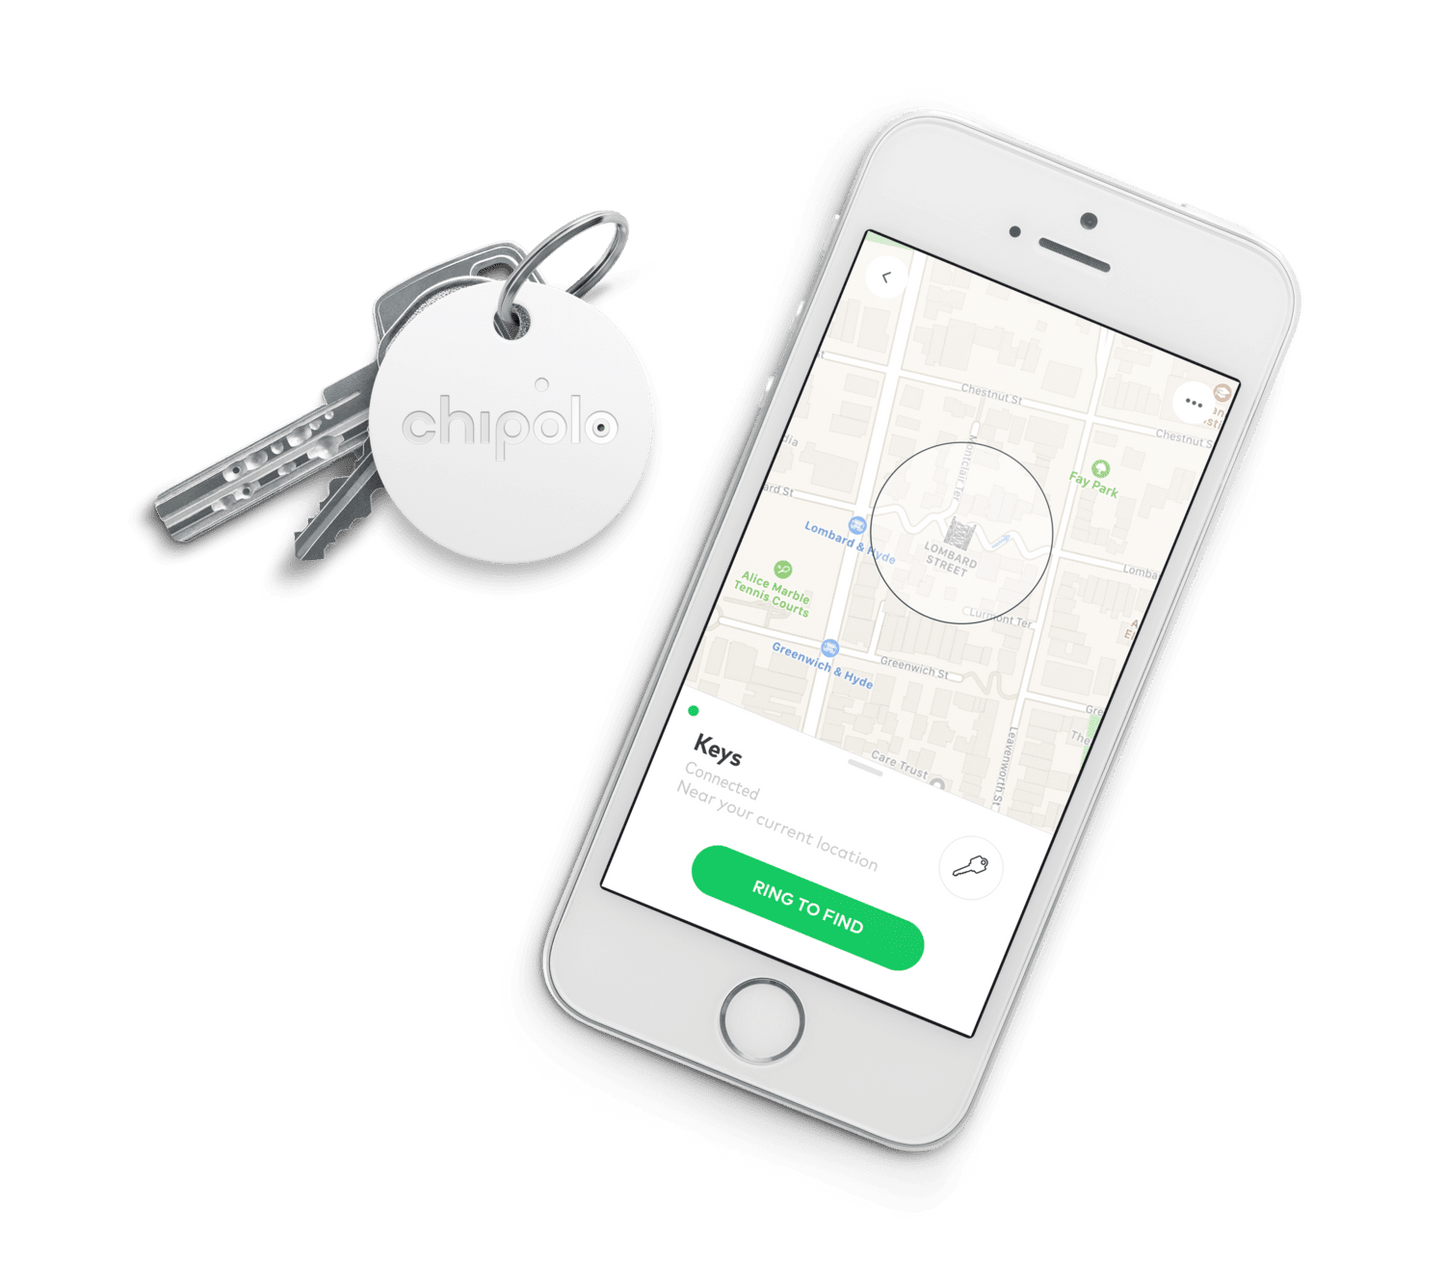 Chipolo Classic 2.0 Bluetooth Item Tracker / Finder - White